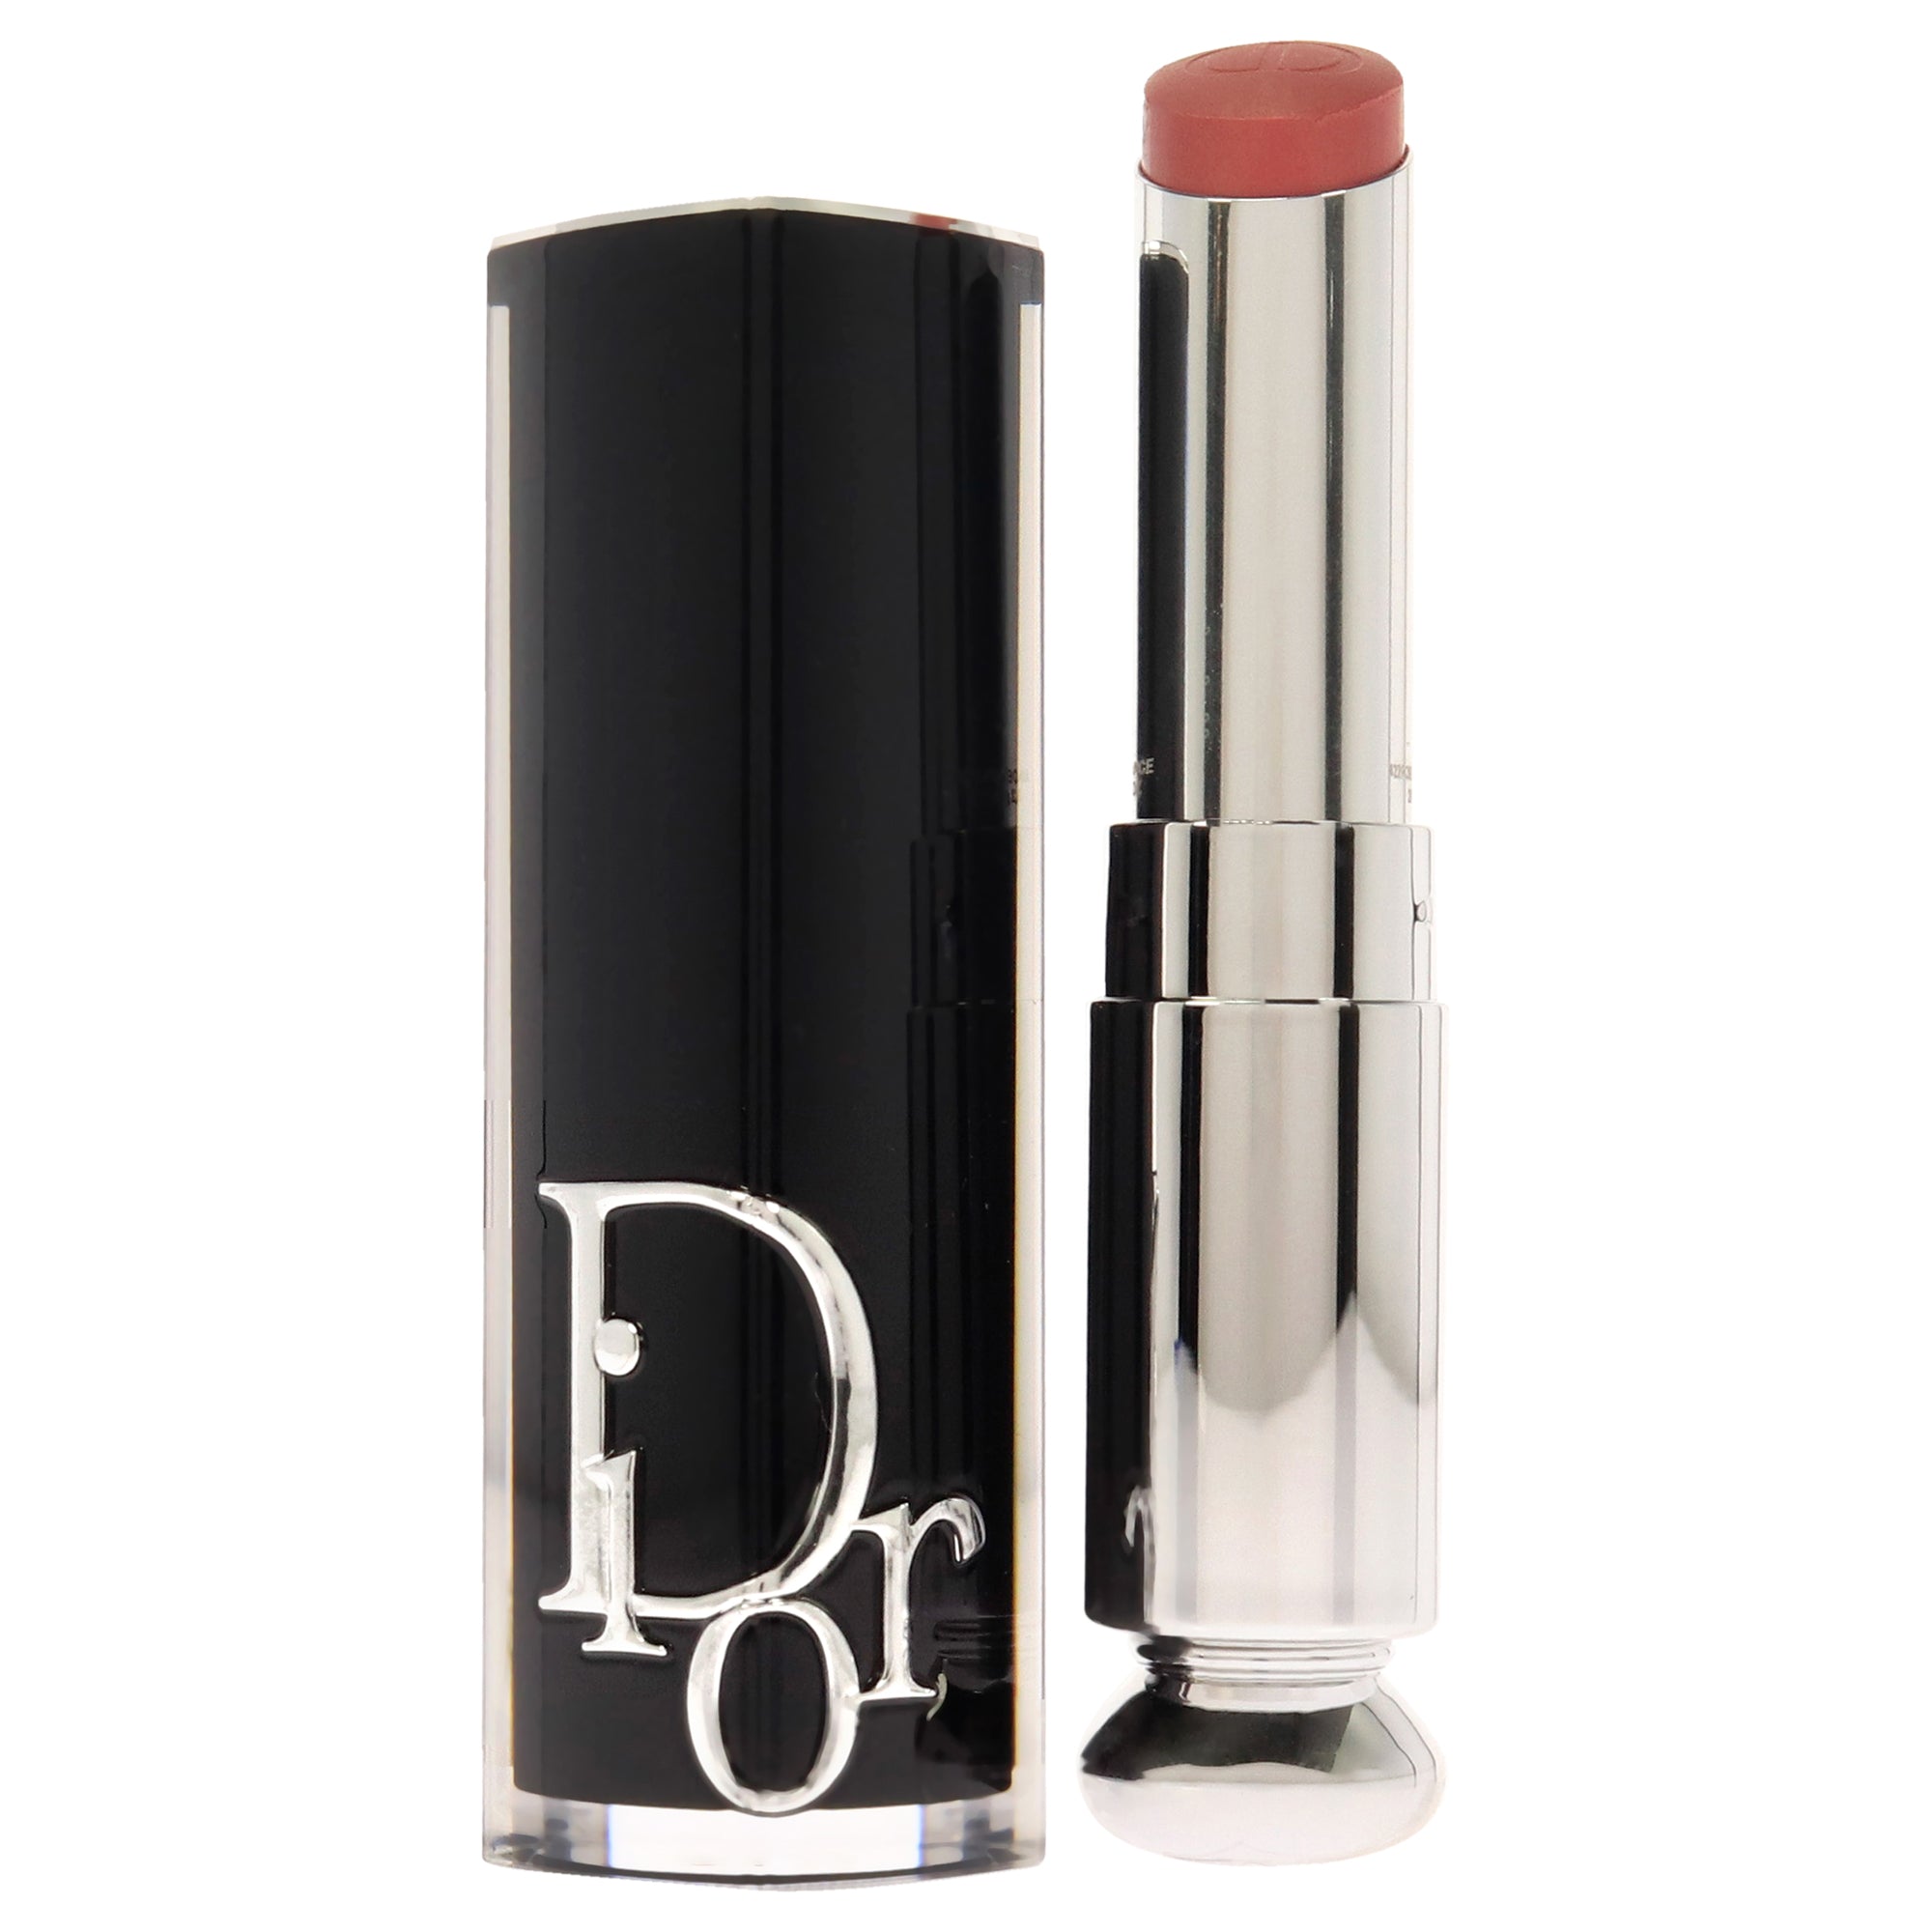 Dior Addict Hydrating Shine Lipstick - 422 Rose Des Vents by Christian Dior for Women - 0.11 oz Lipstick (Refillable)